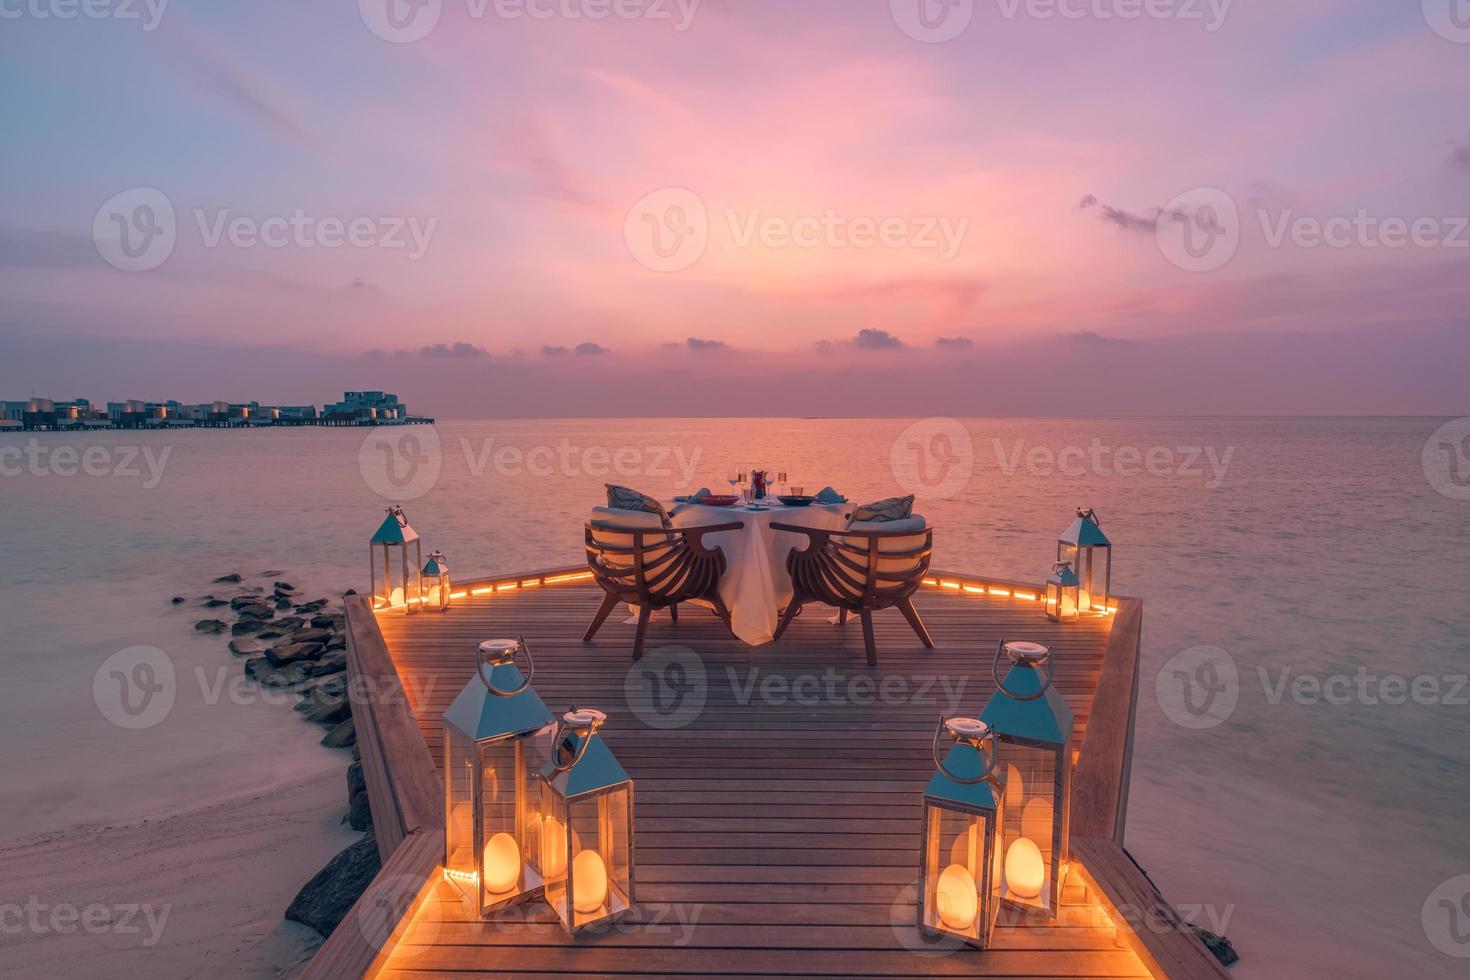 Seascape view under sunset light with dining table with infinity pool around. Romantic tropical getaway for two, couple concept. Chairs, food and romance. Luxury destination dining, honeymoon template photo